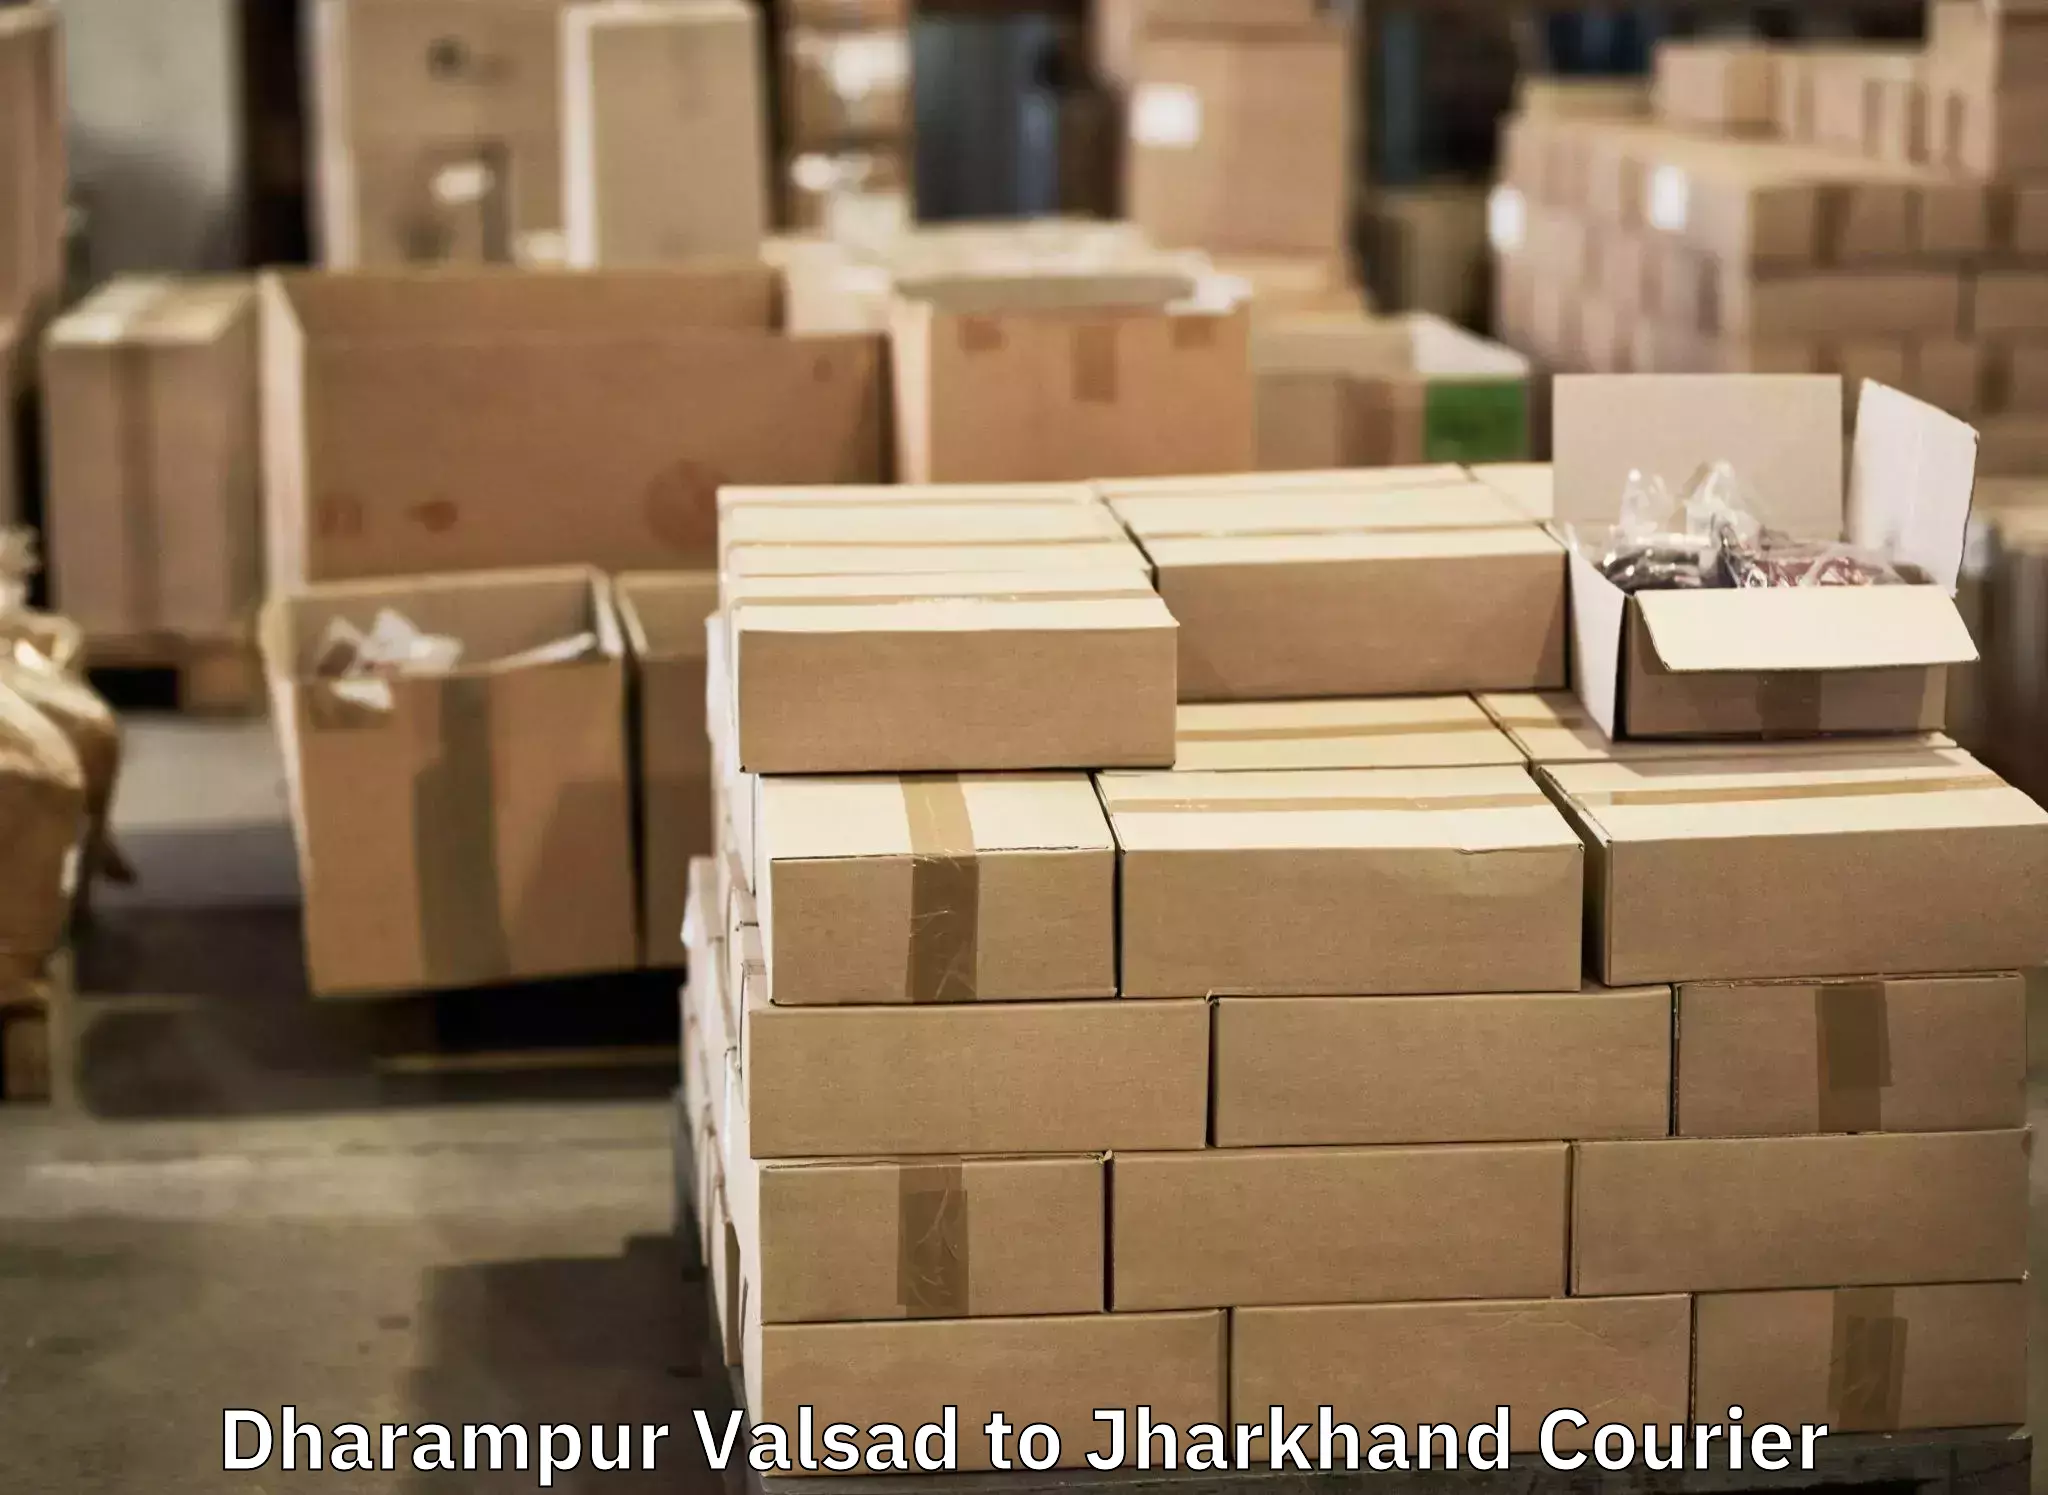 Baggage transport technology Dharampur Valsad to Jharkhand